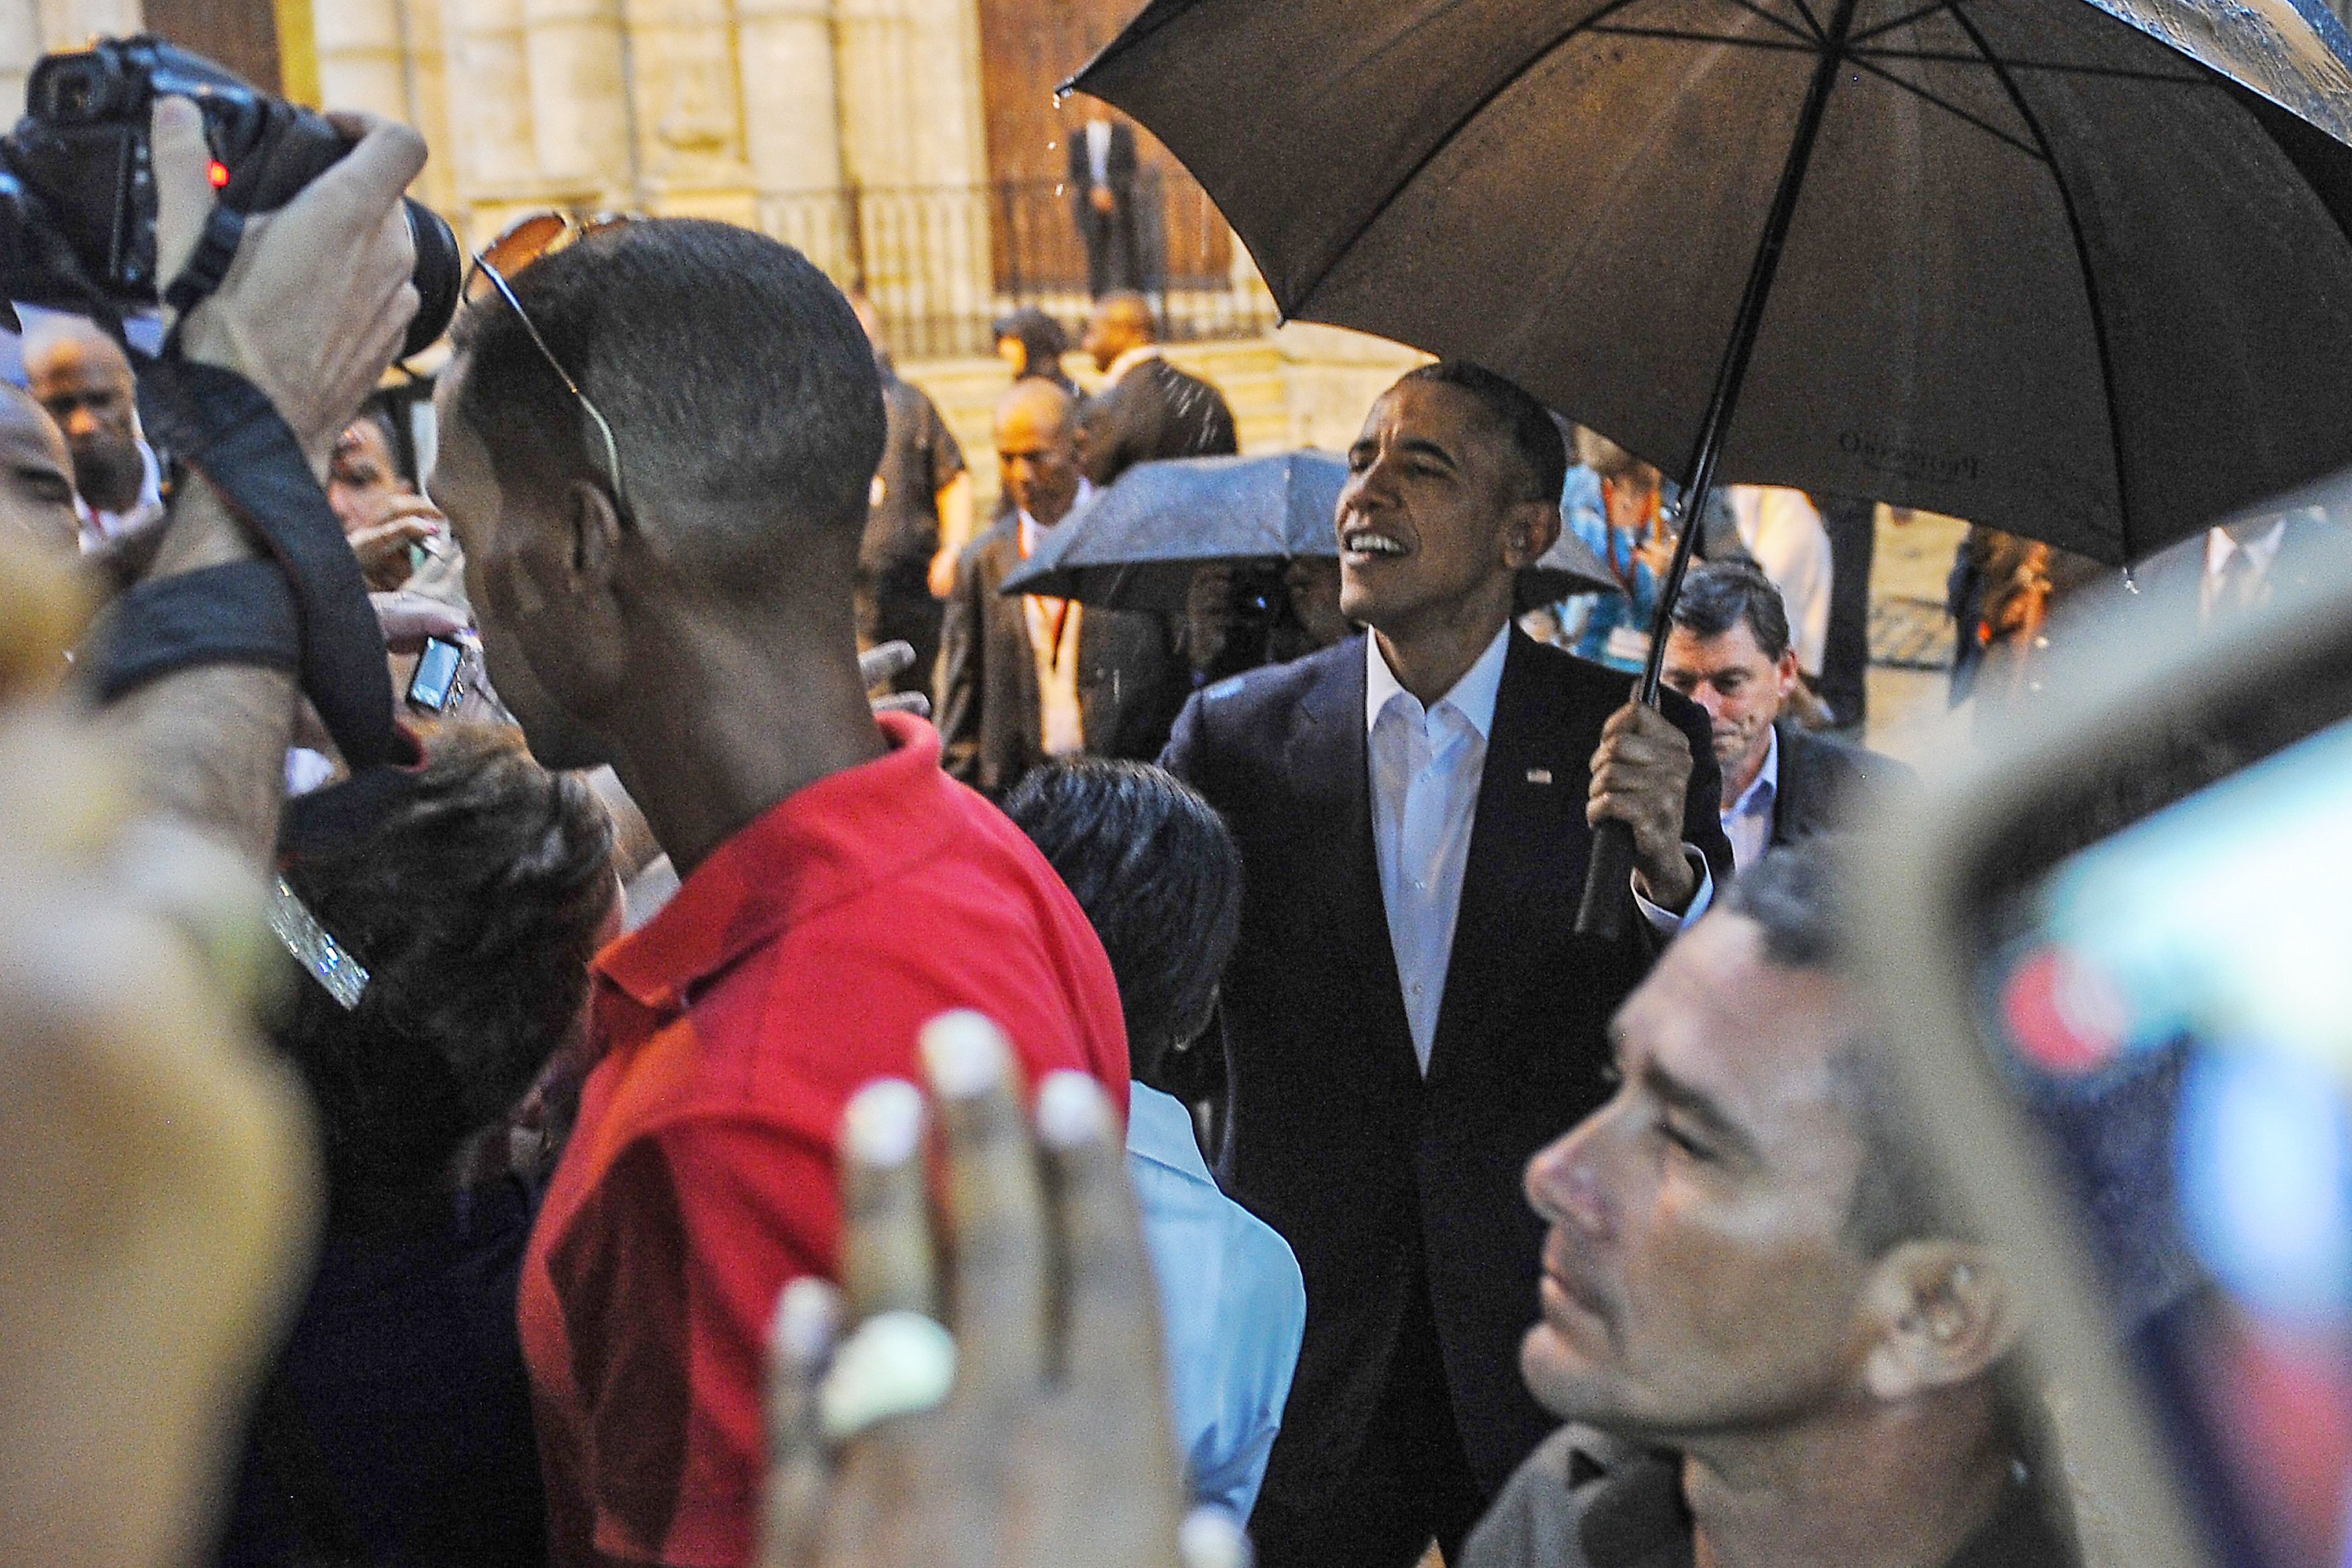 Every Photo You Want to See of the Obamas' Historic Trip to Cuba
